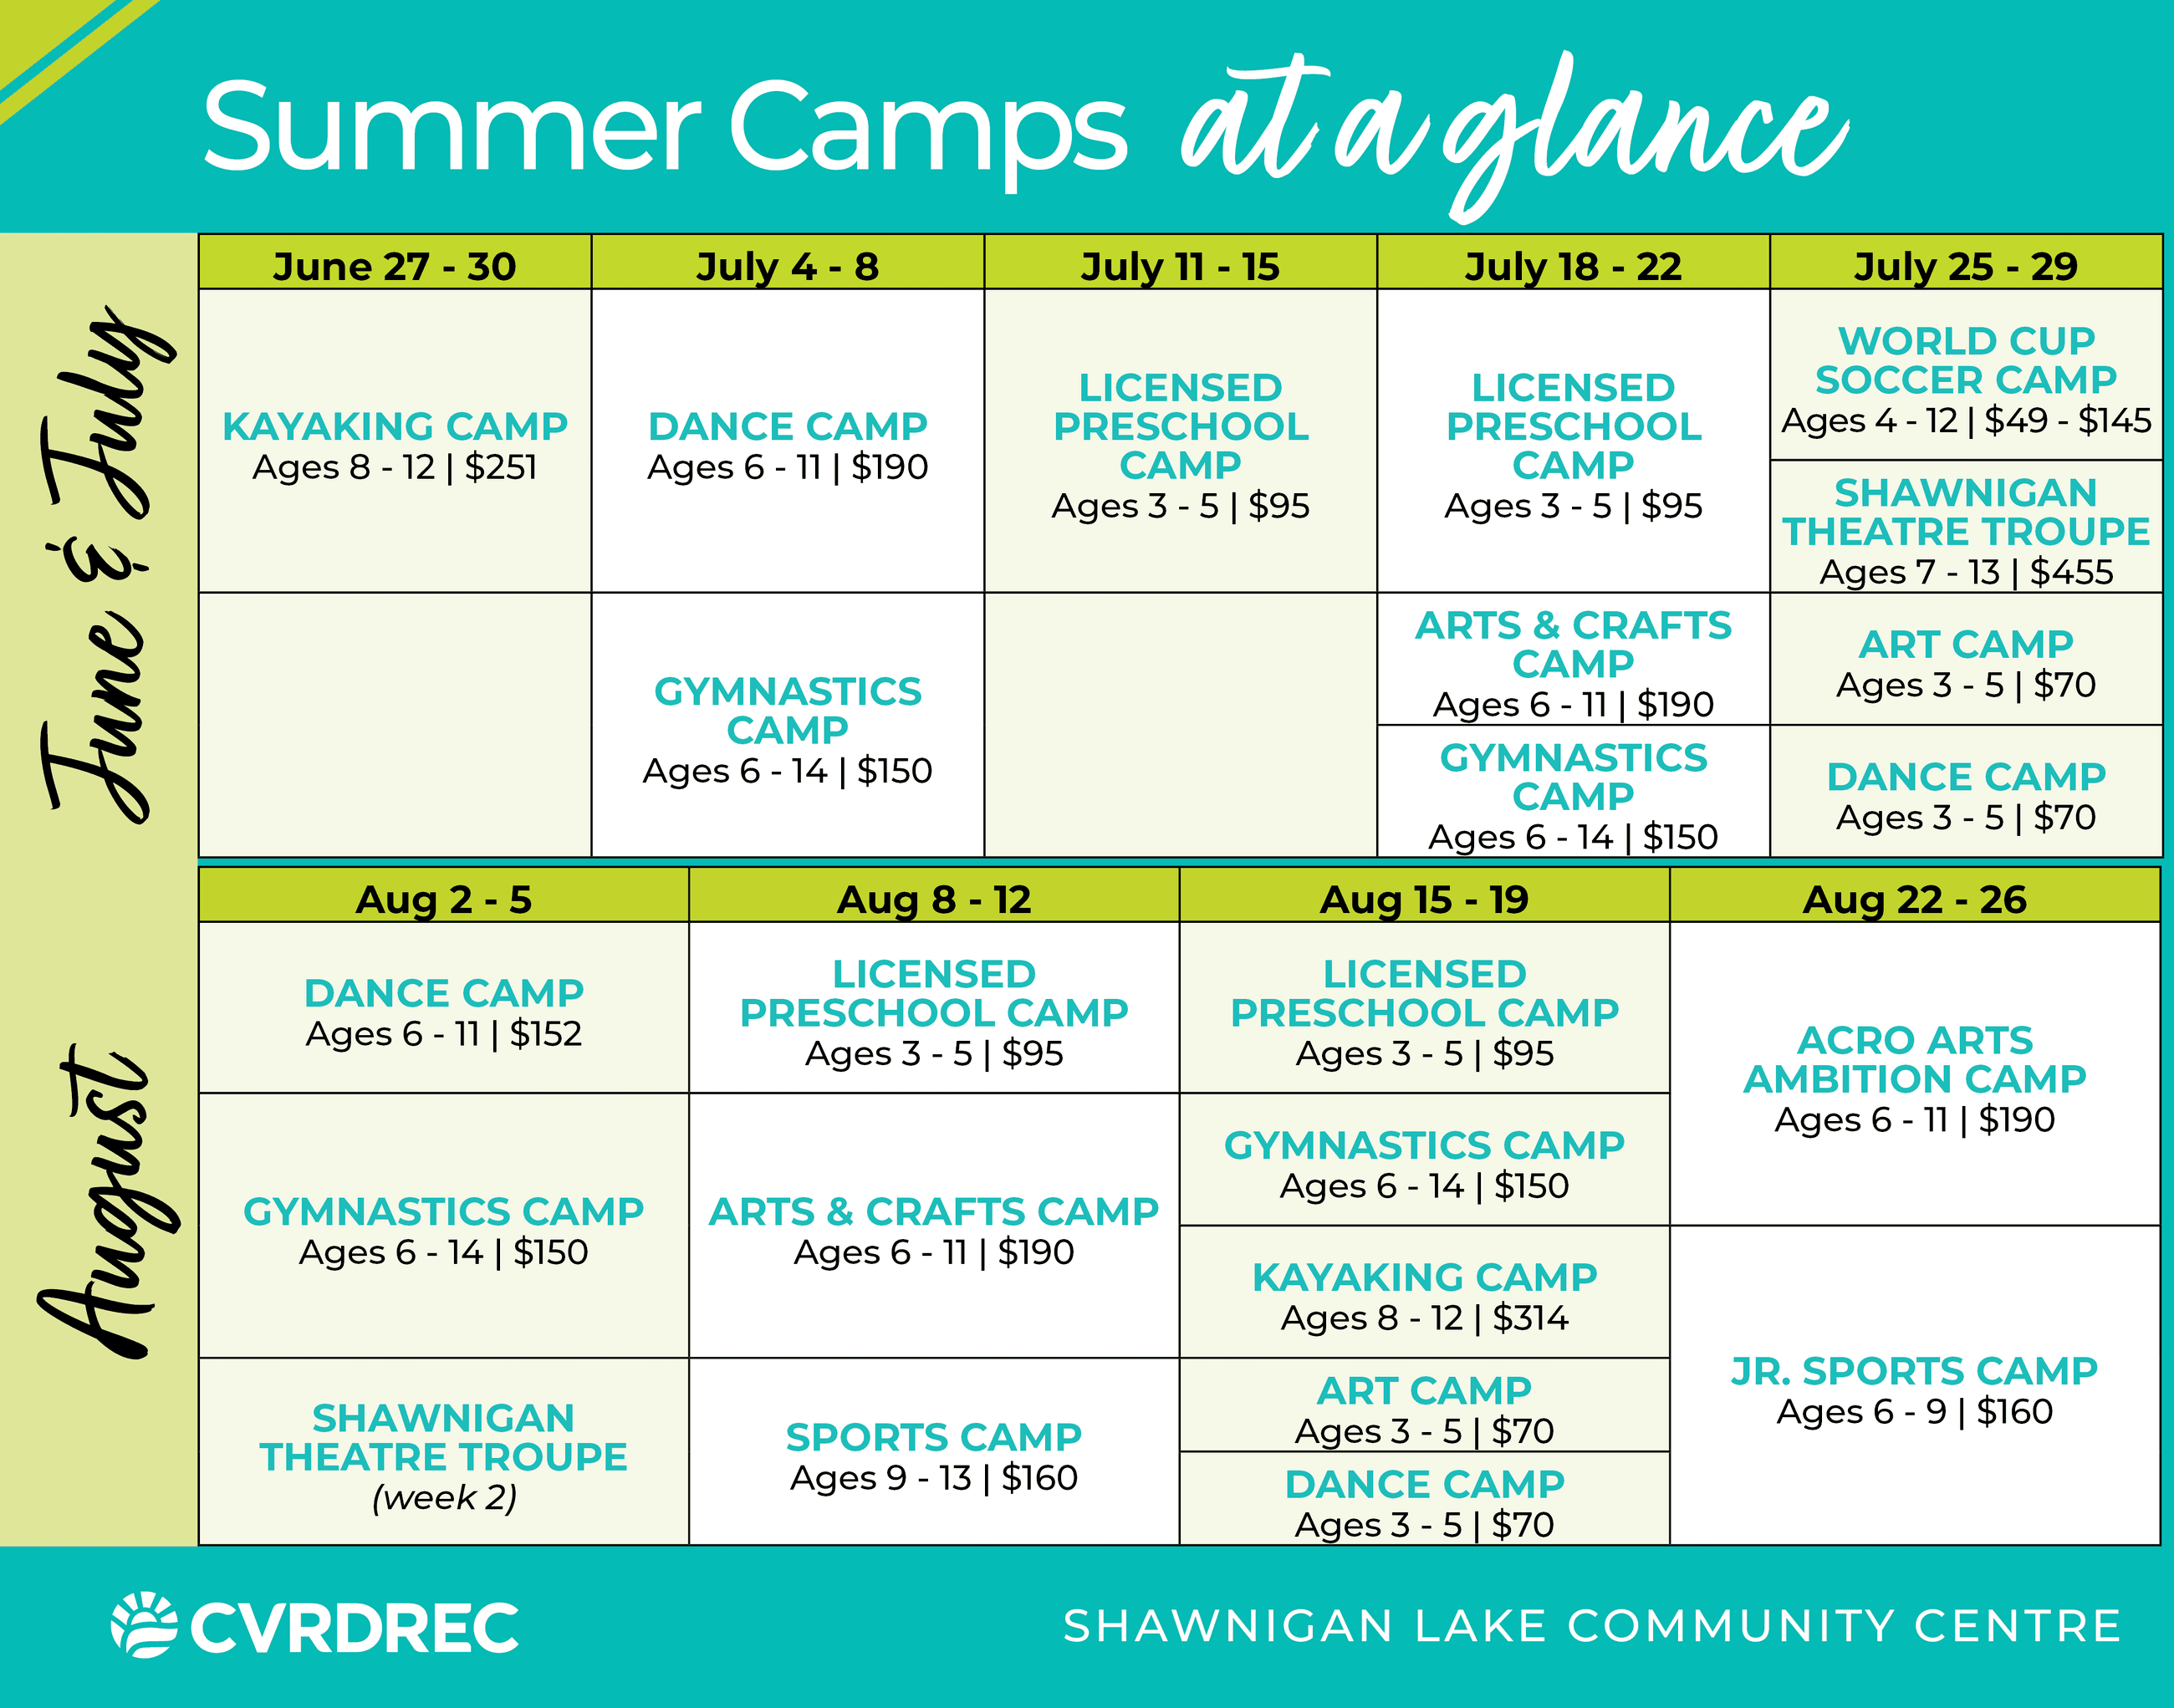 SLCC - Summer Camps at a Glance 2022